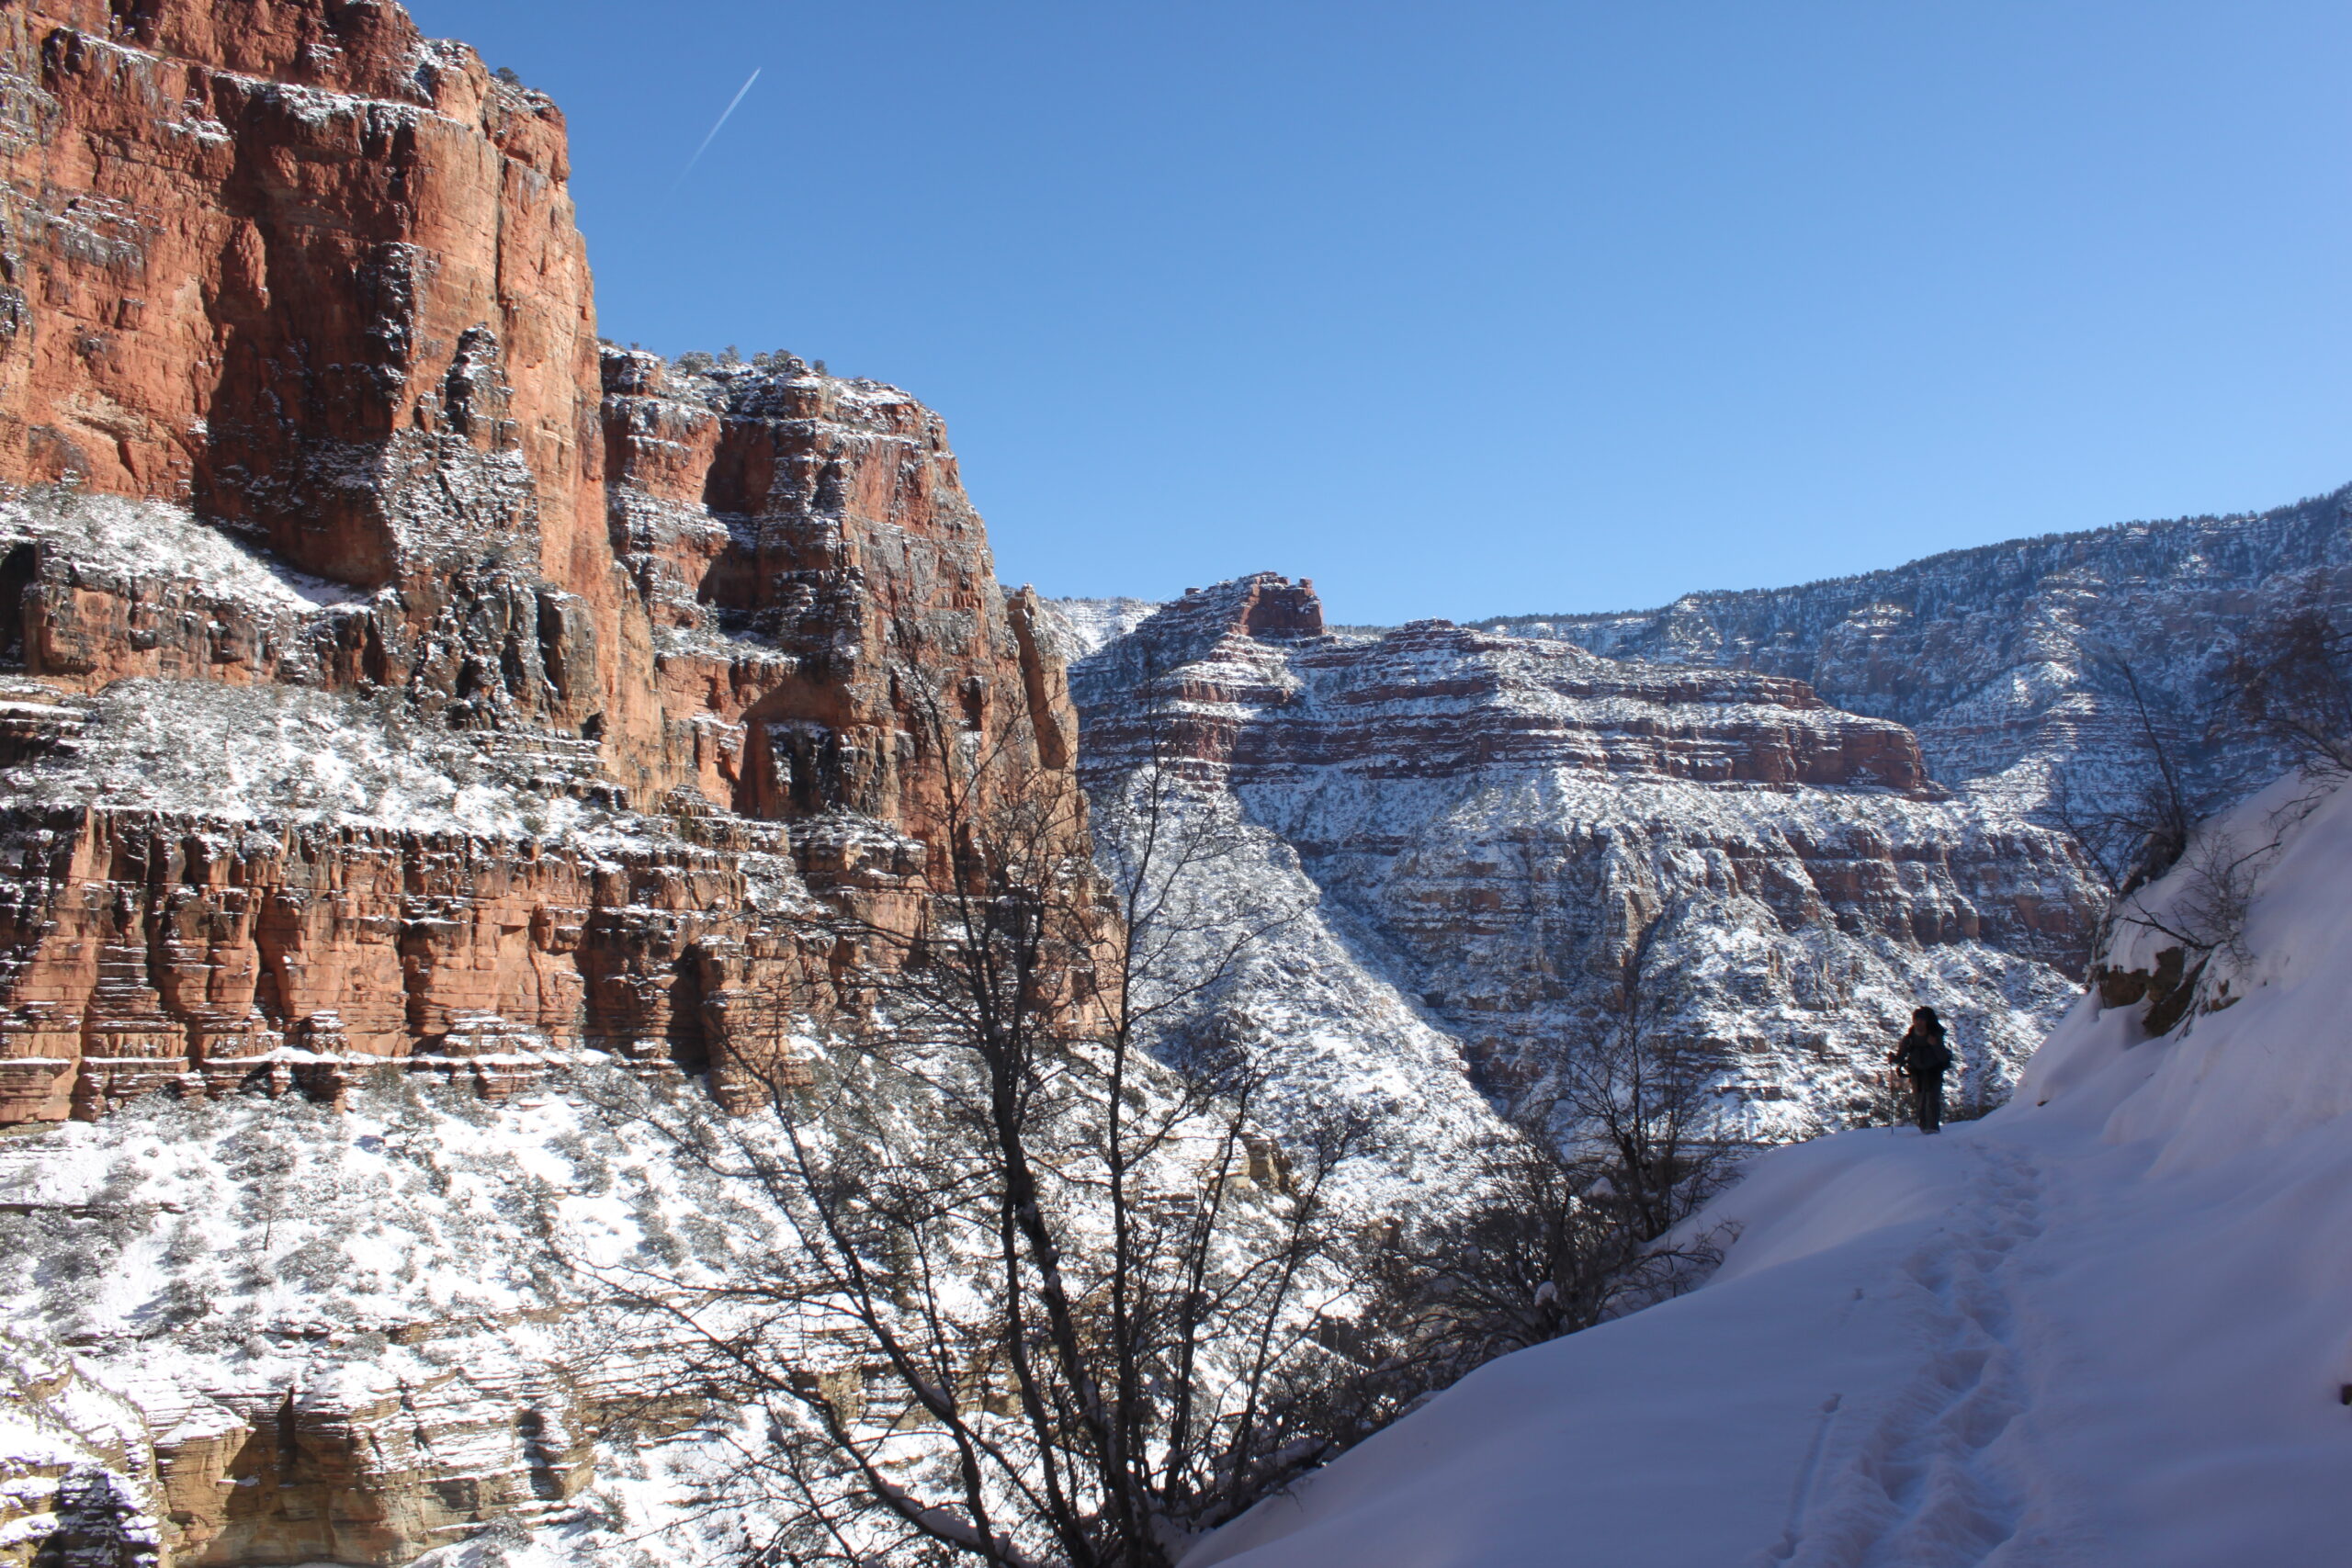 Brian hikes on the snowy North Kaibab Trail below the Grand Canyon's North Rim.